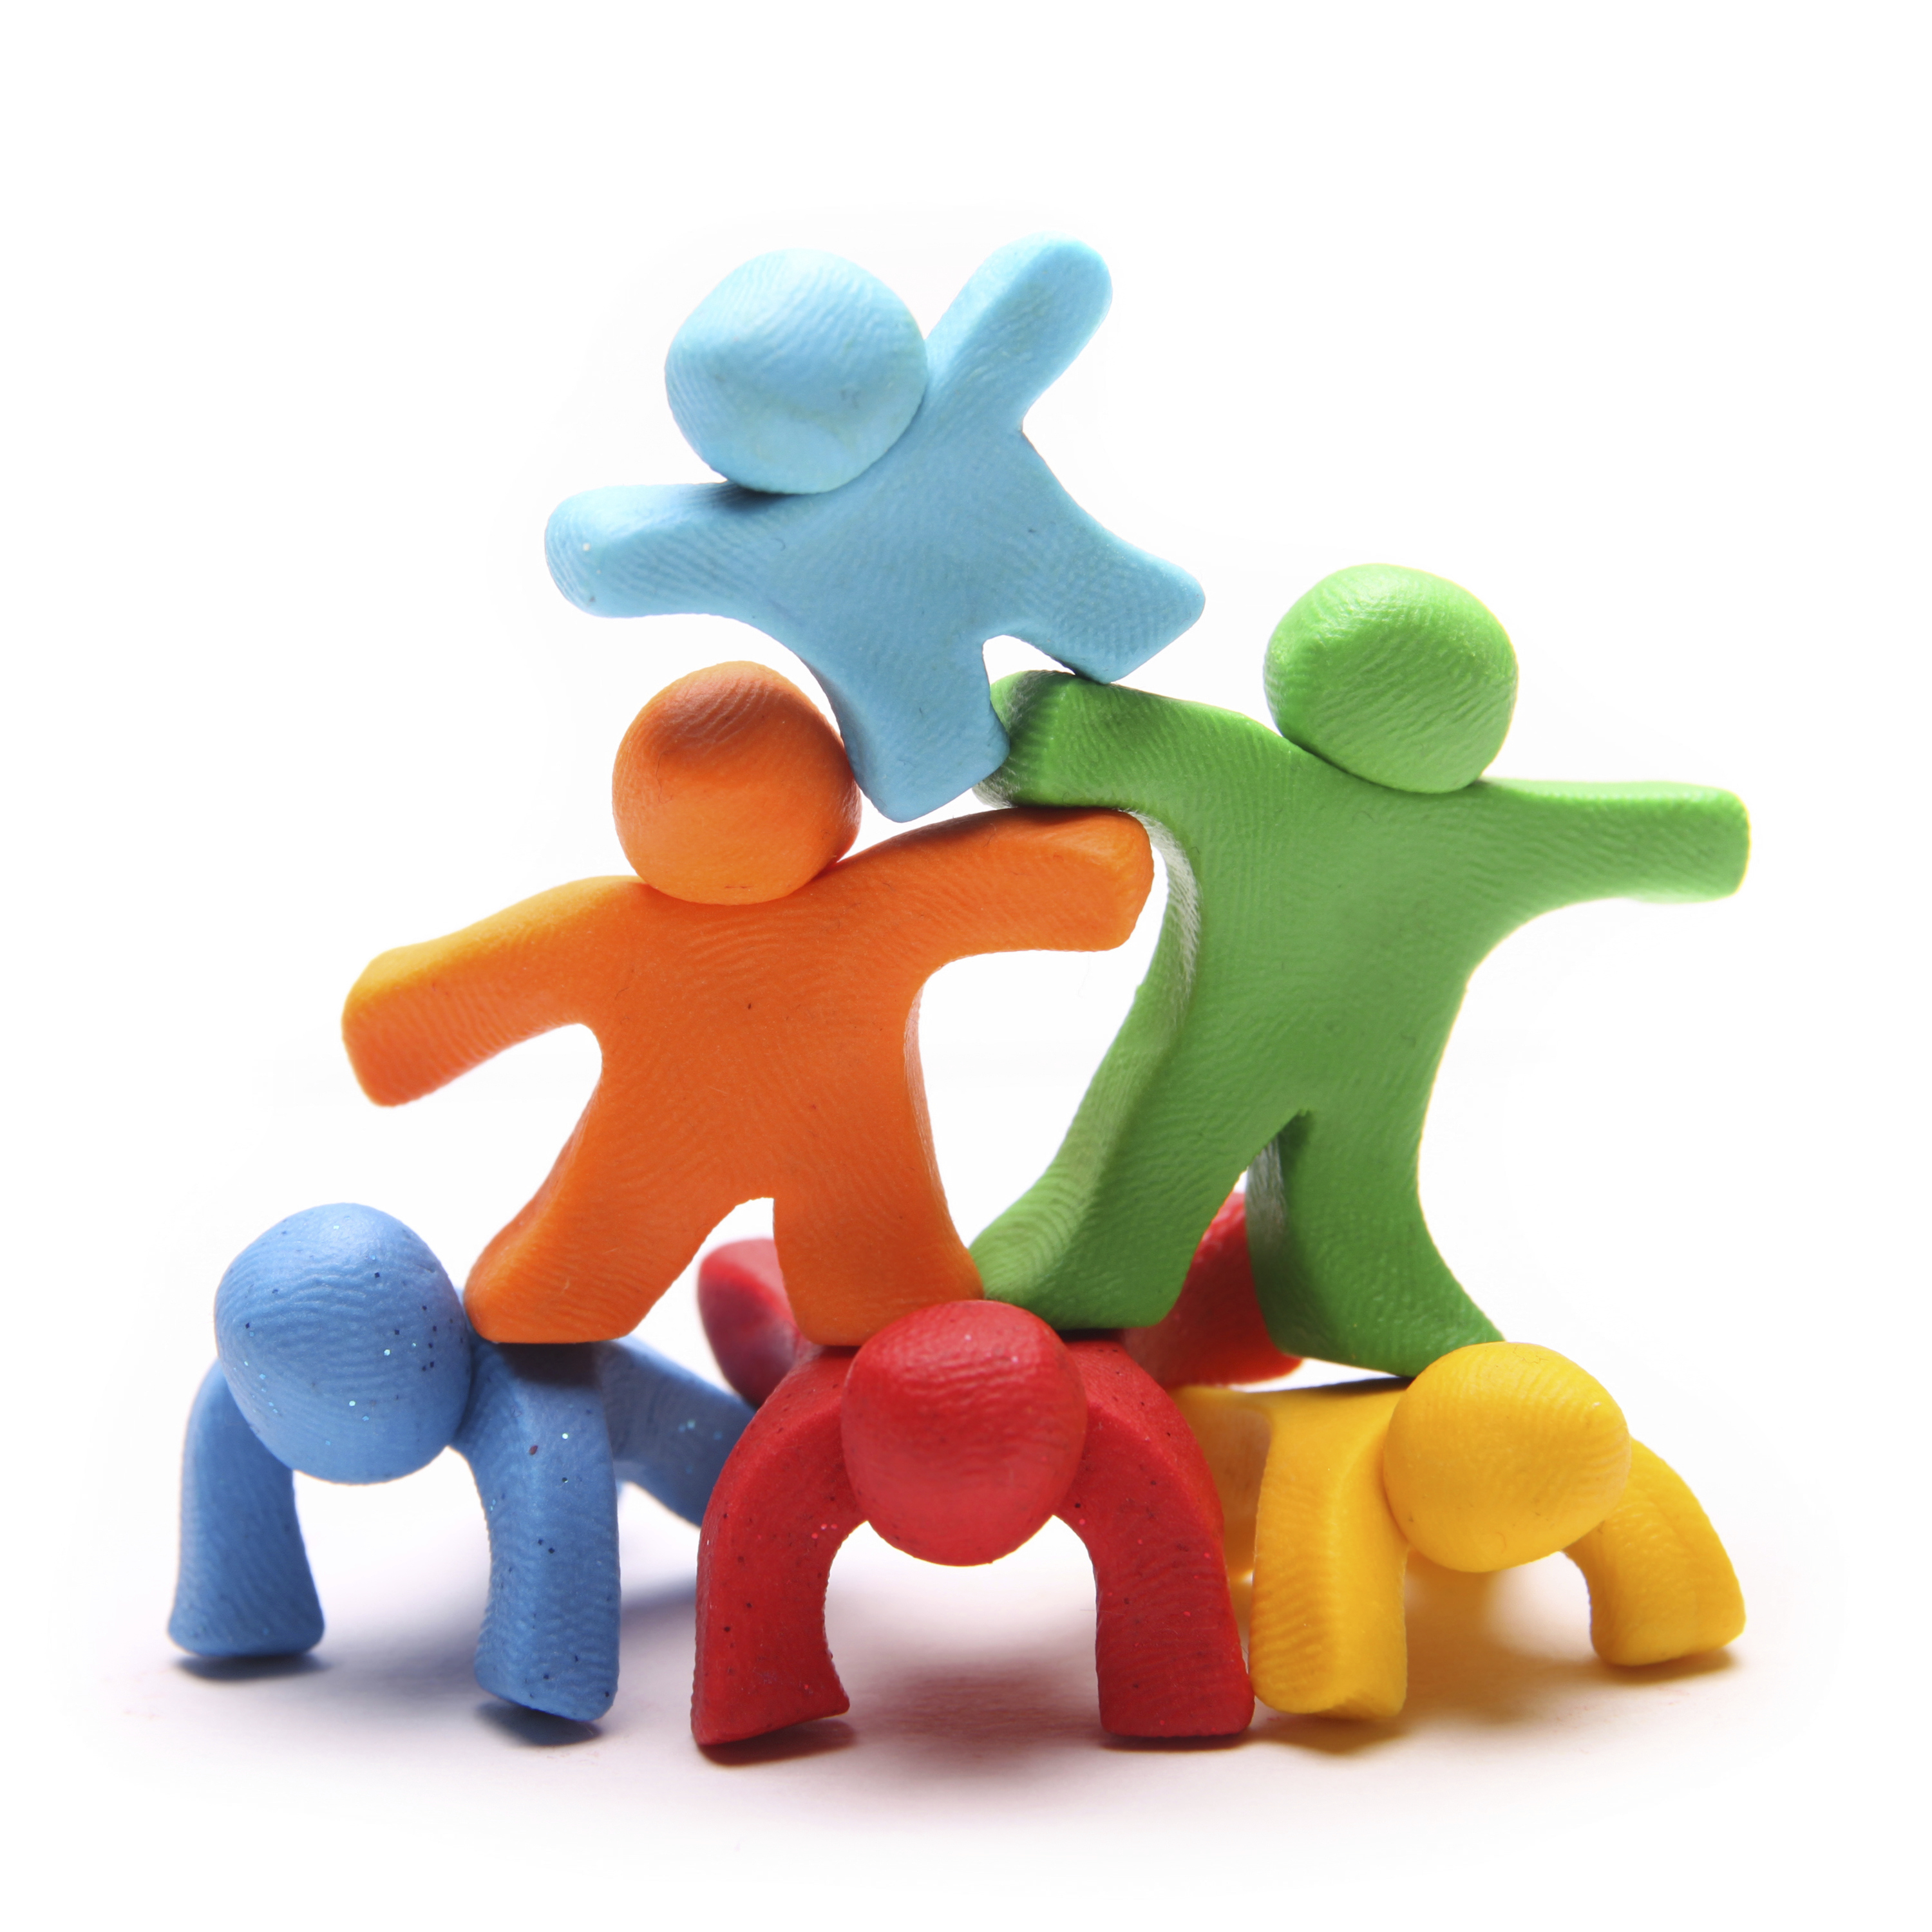 free clipart images teamwork - photo #11